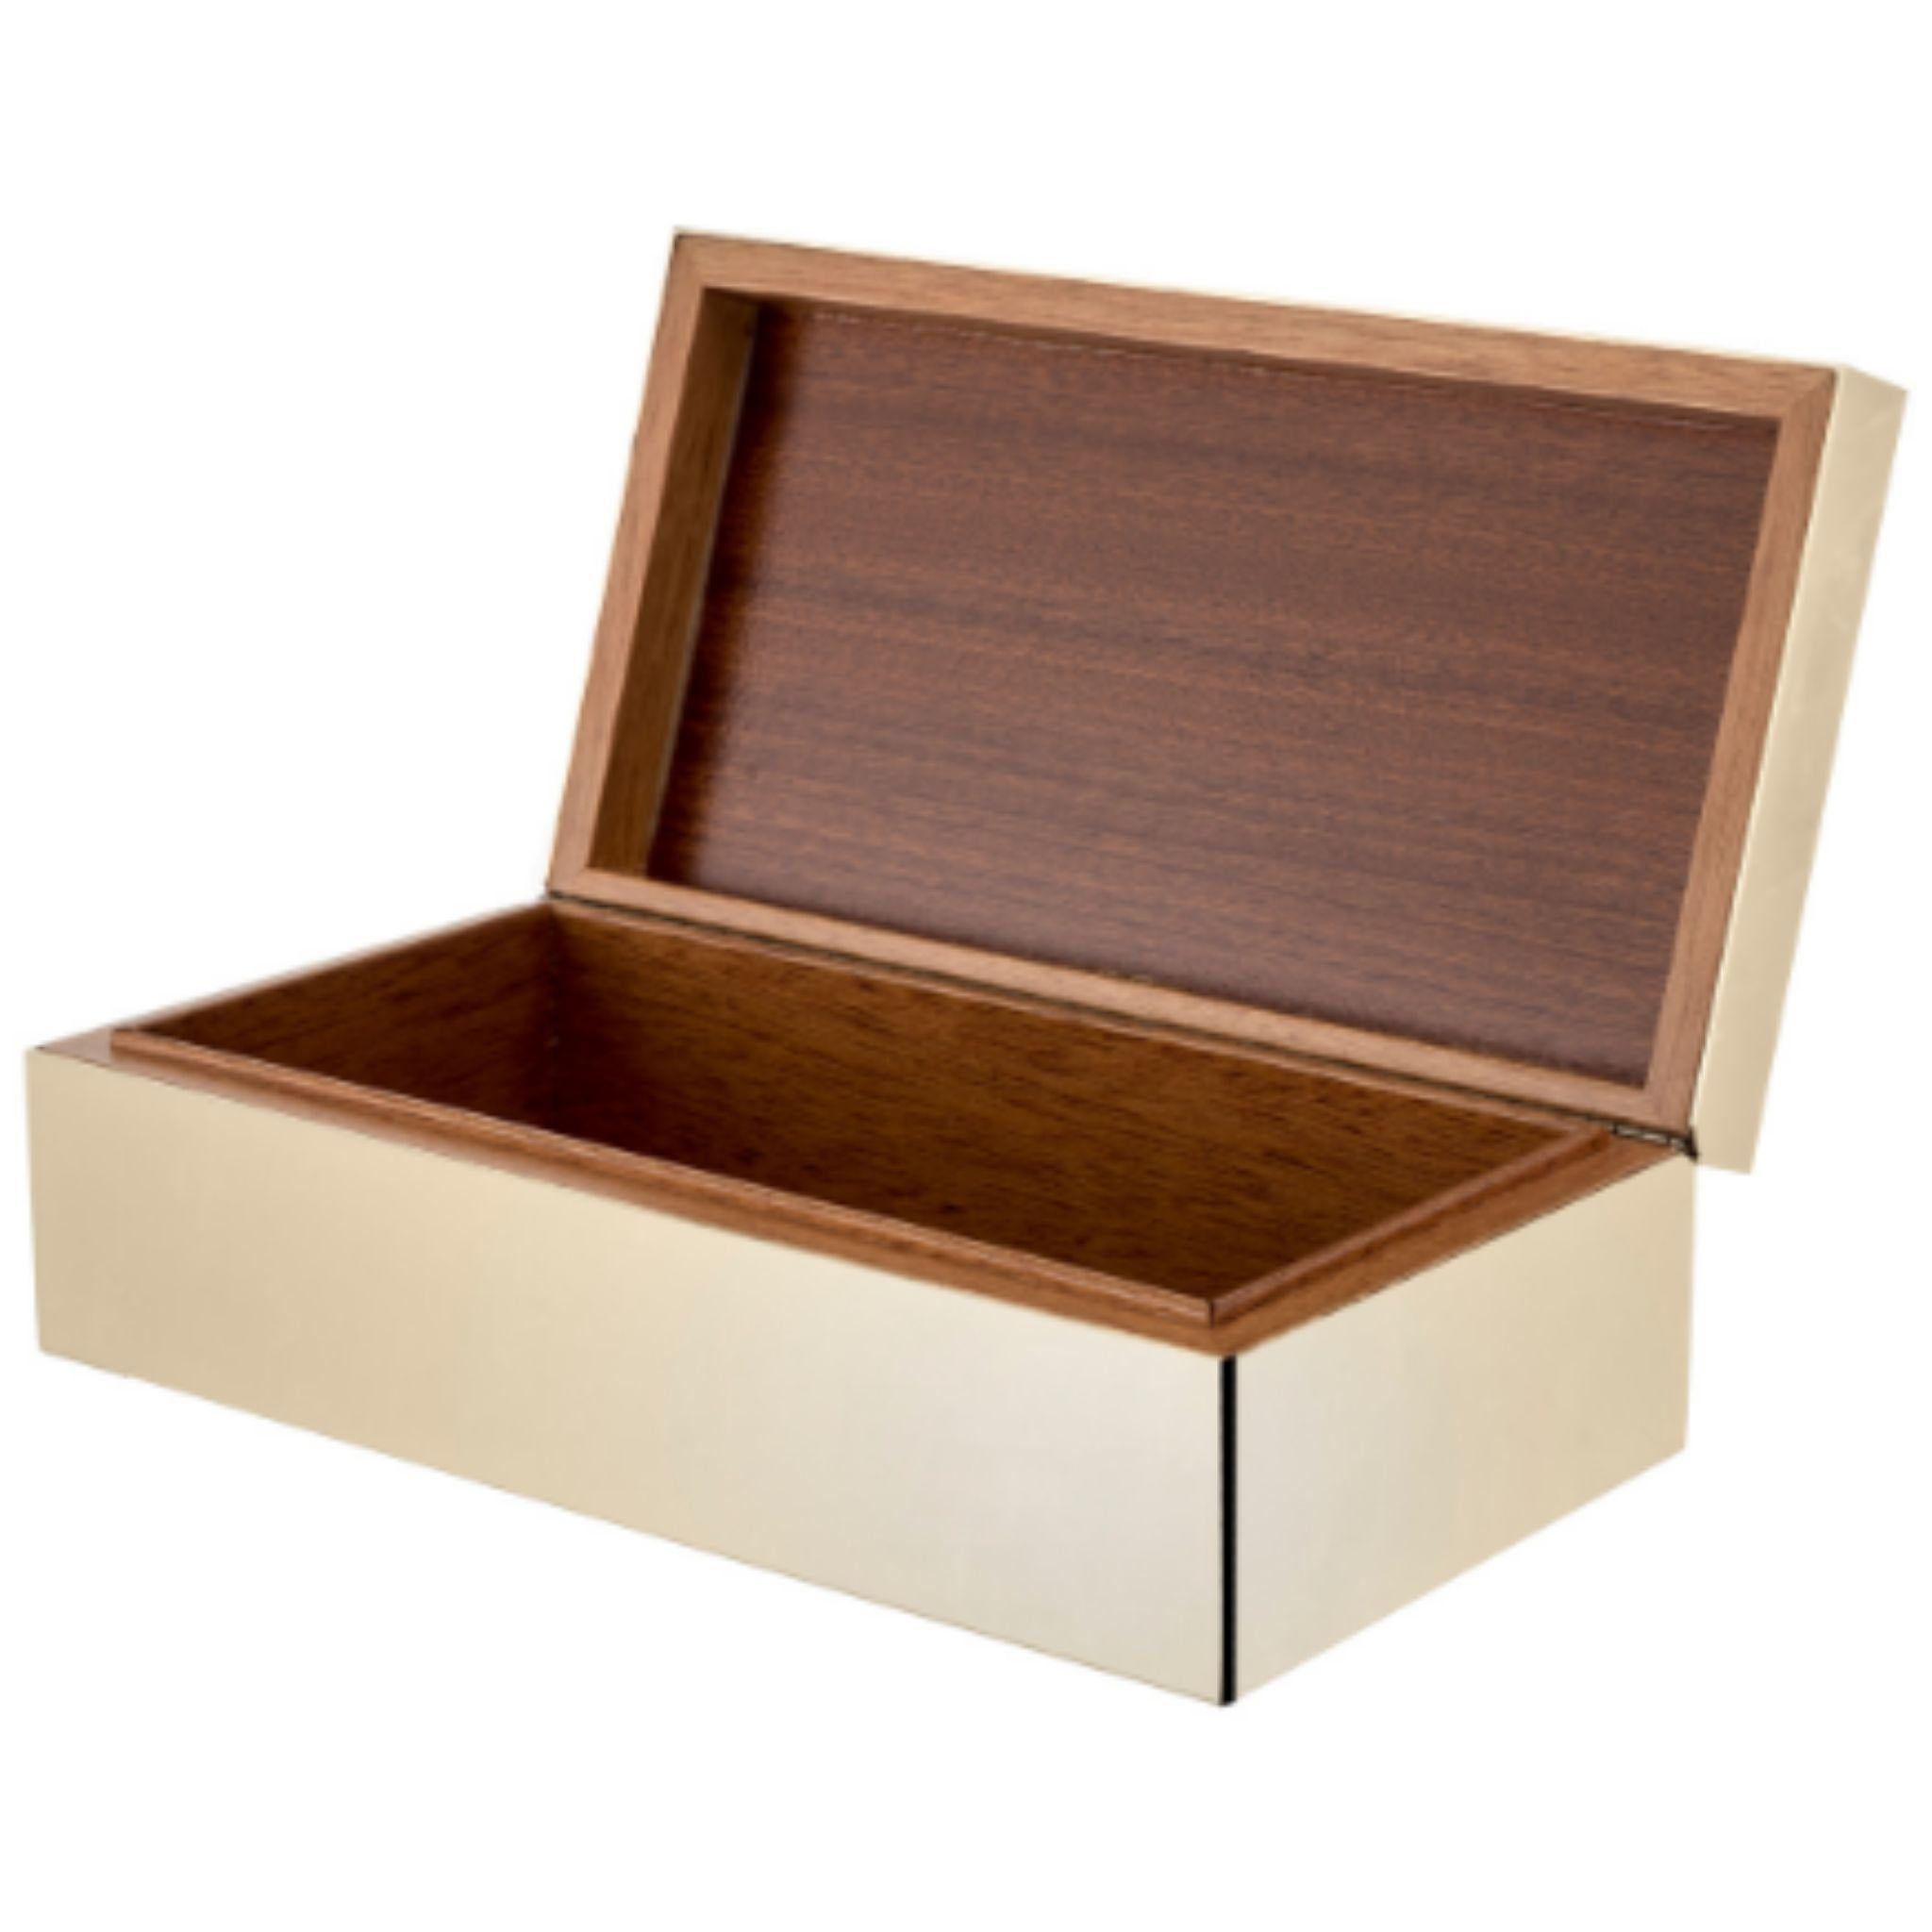 Contemporary Brucaliffo Brass Cigar Box with Wooden Interior For Sale